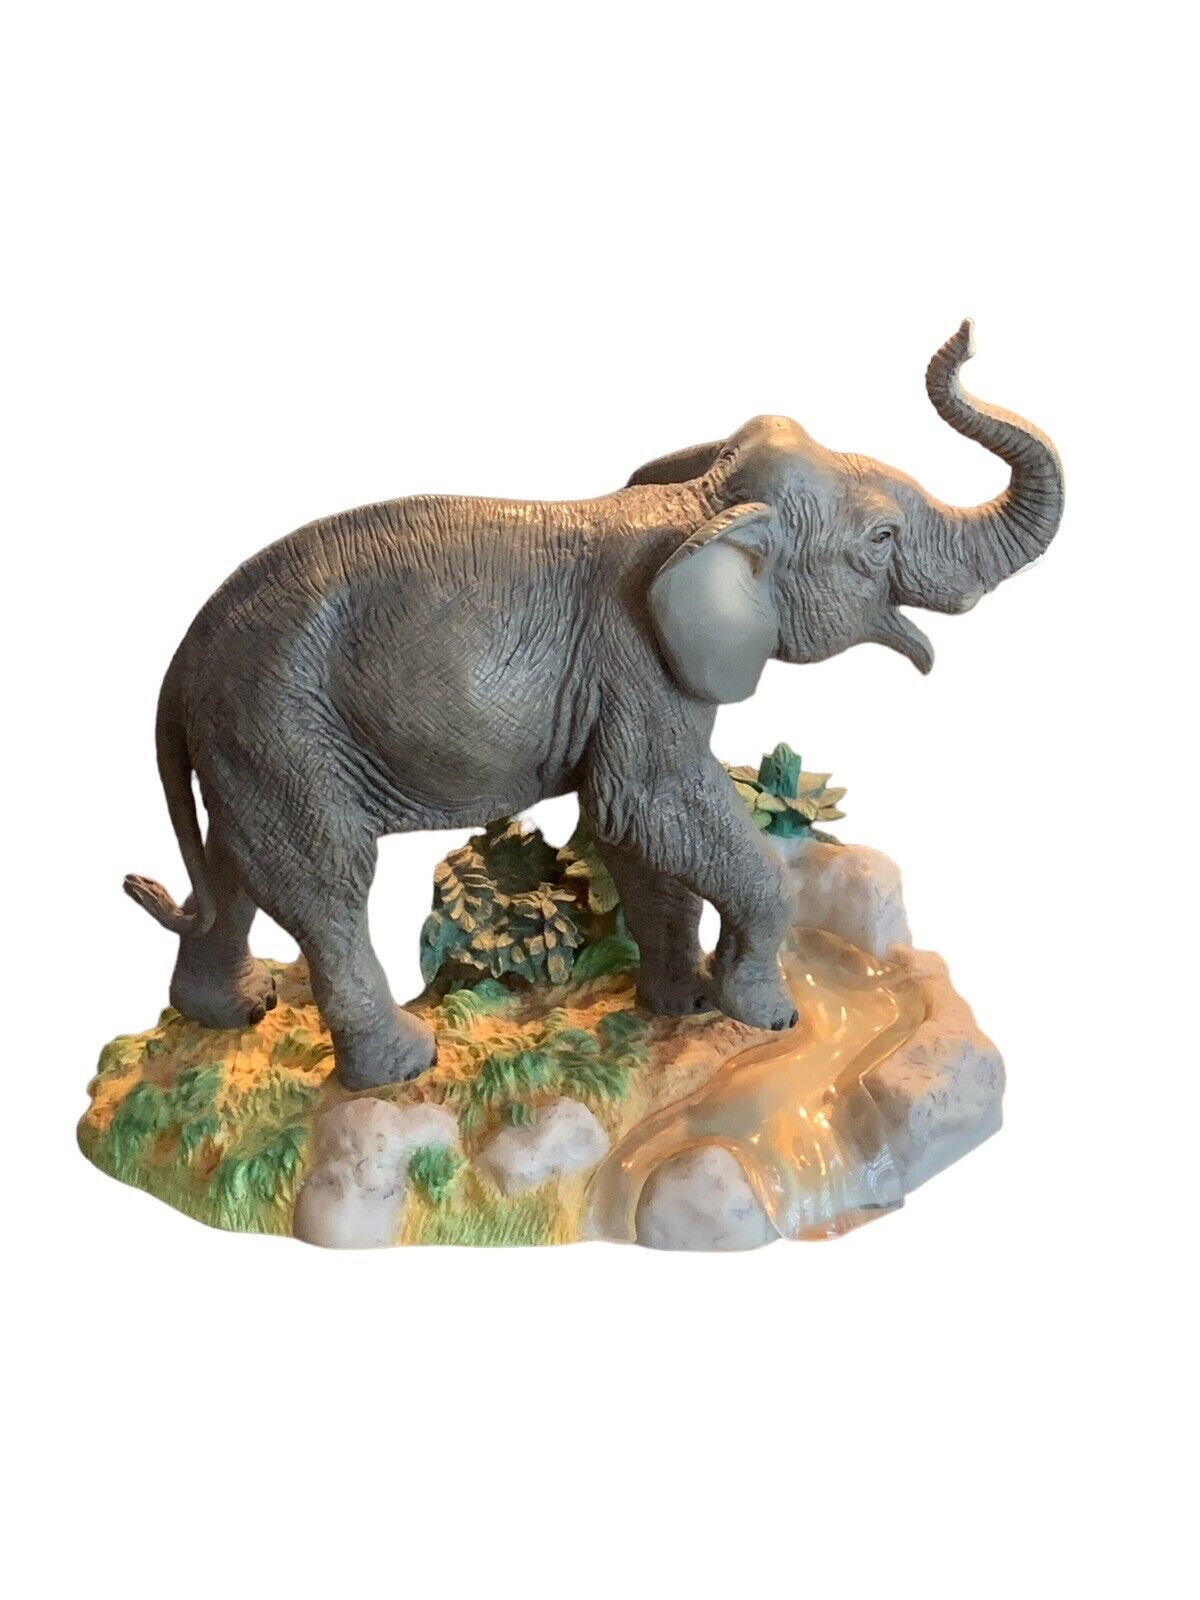 Lenox Smithsonian “The Asian Elephant” 2000 Handcrafted 9 1/2” Length